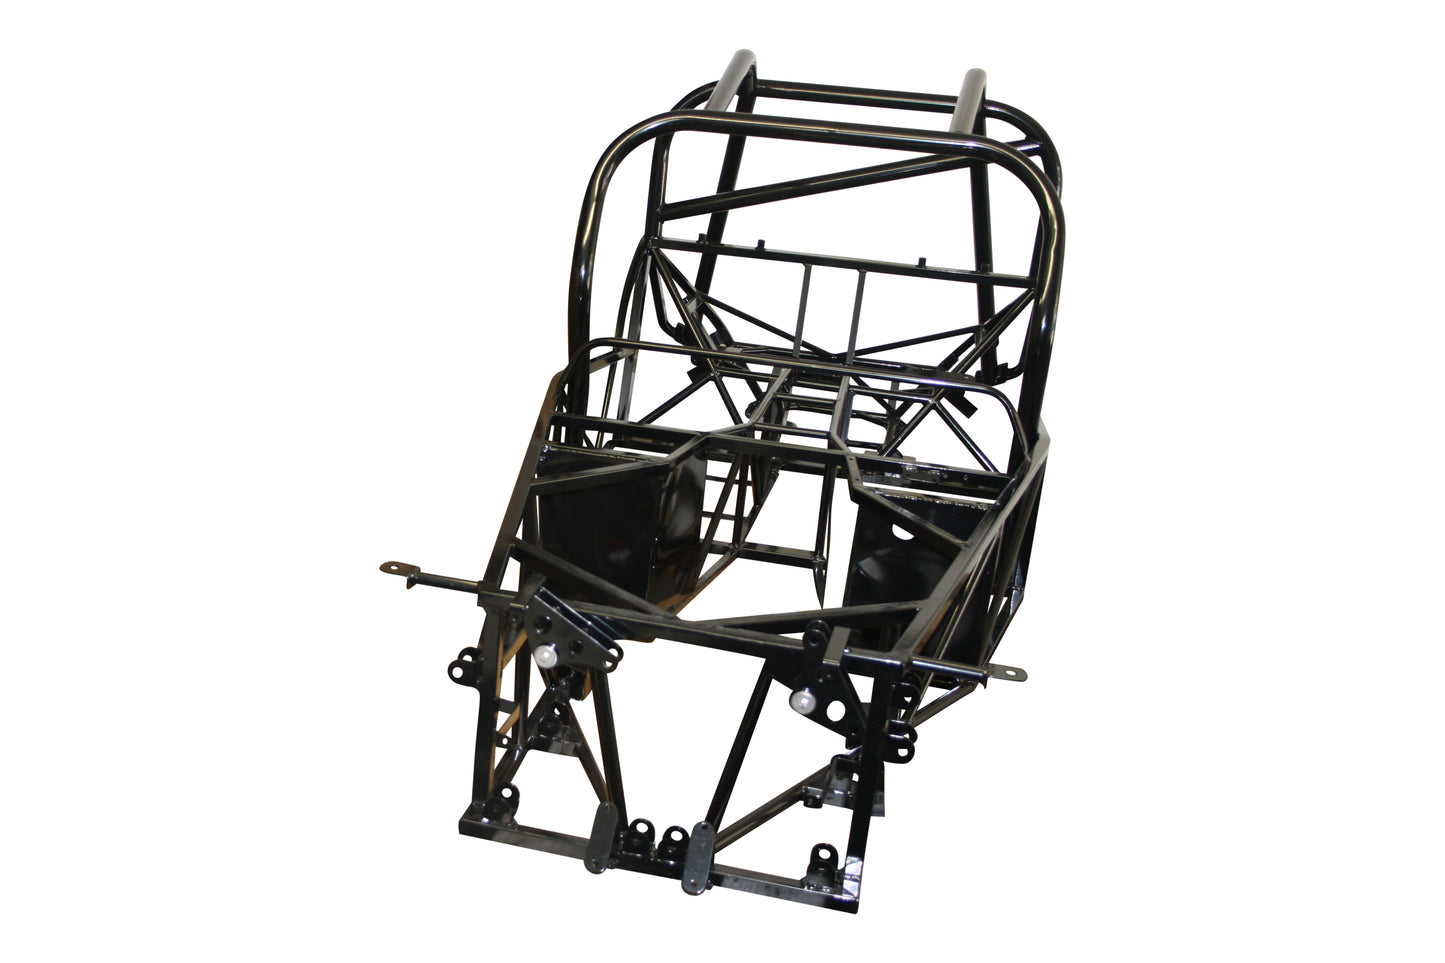 MK Indy RR Chassis